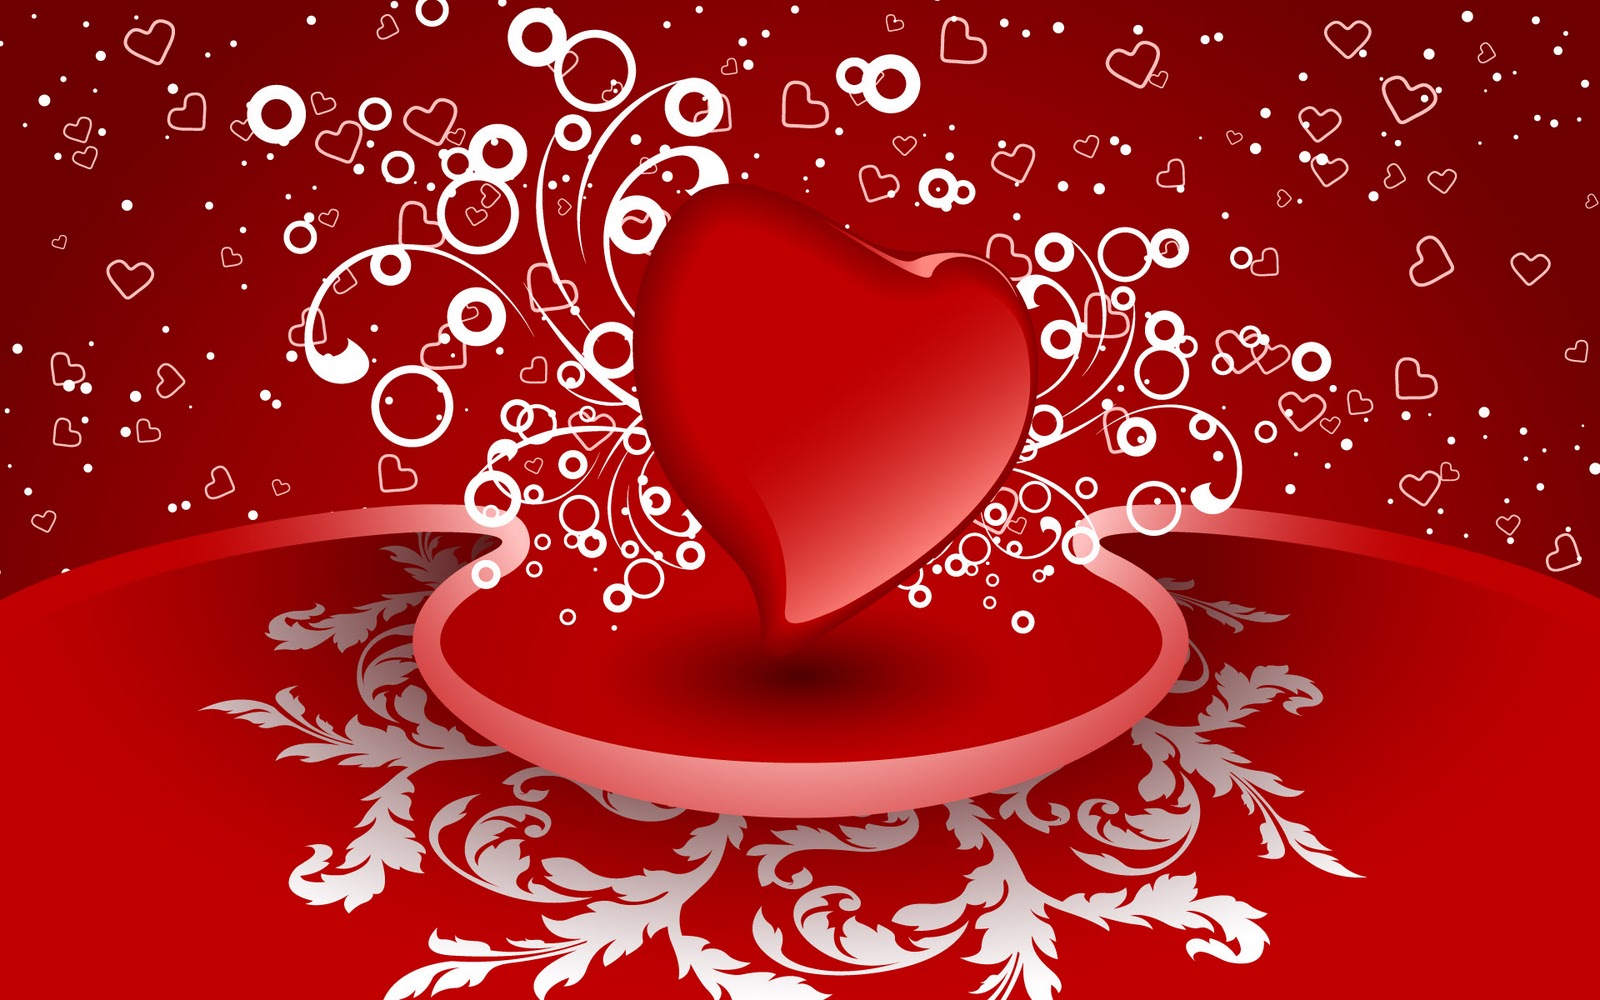 Life for SMS: Happy valentines day backgrounds 1